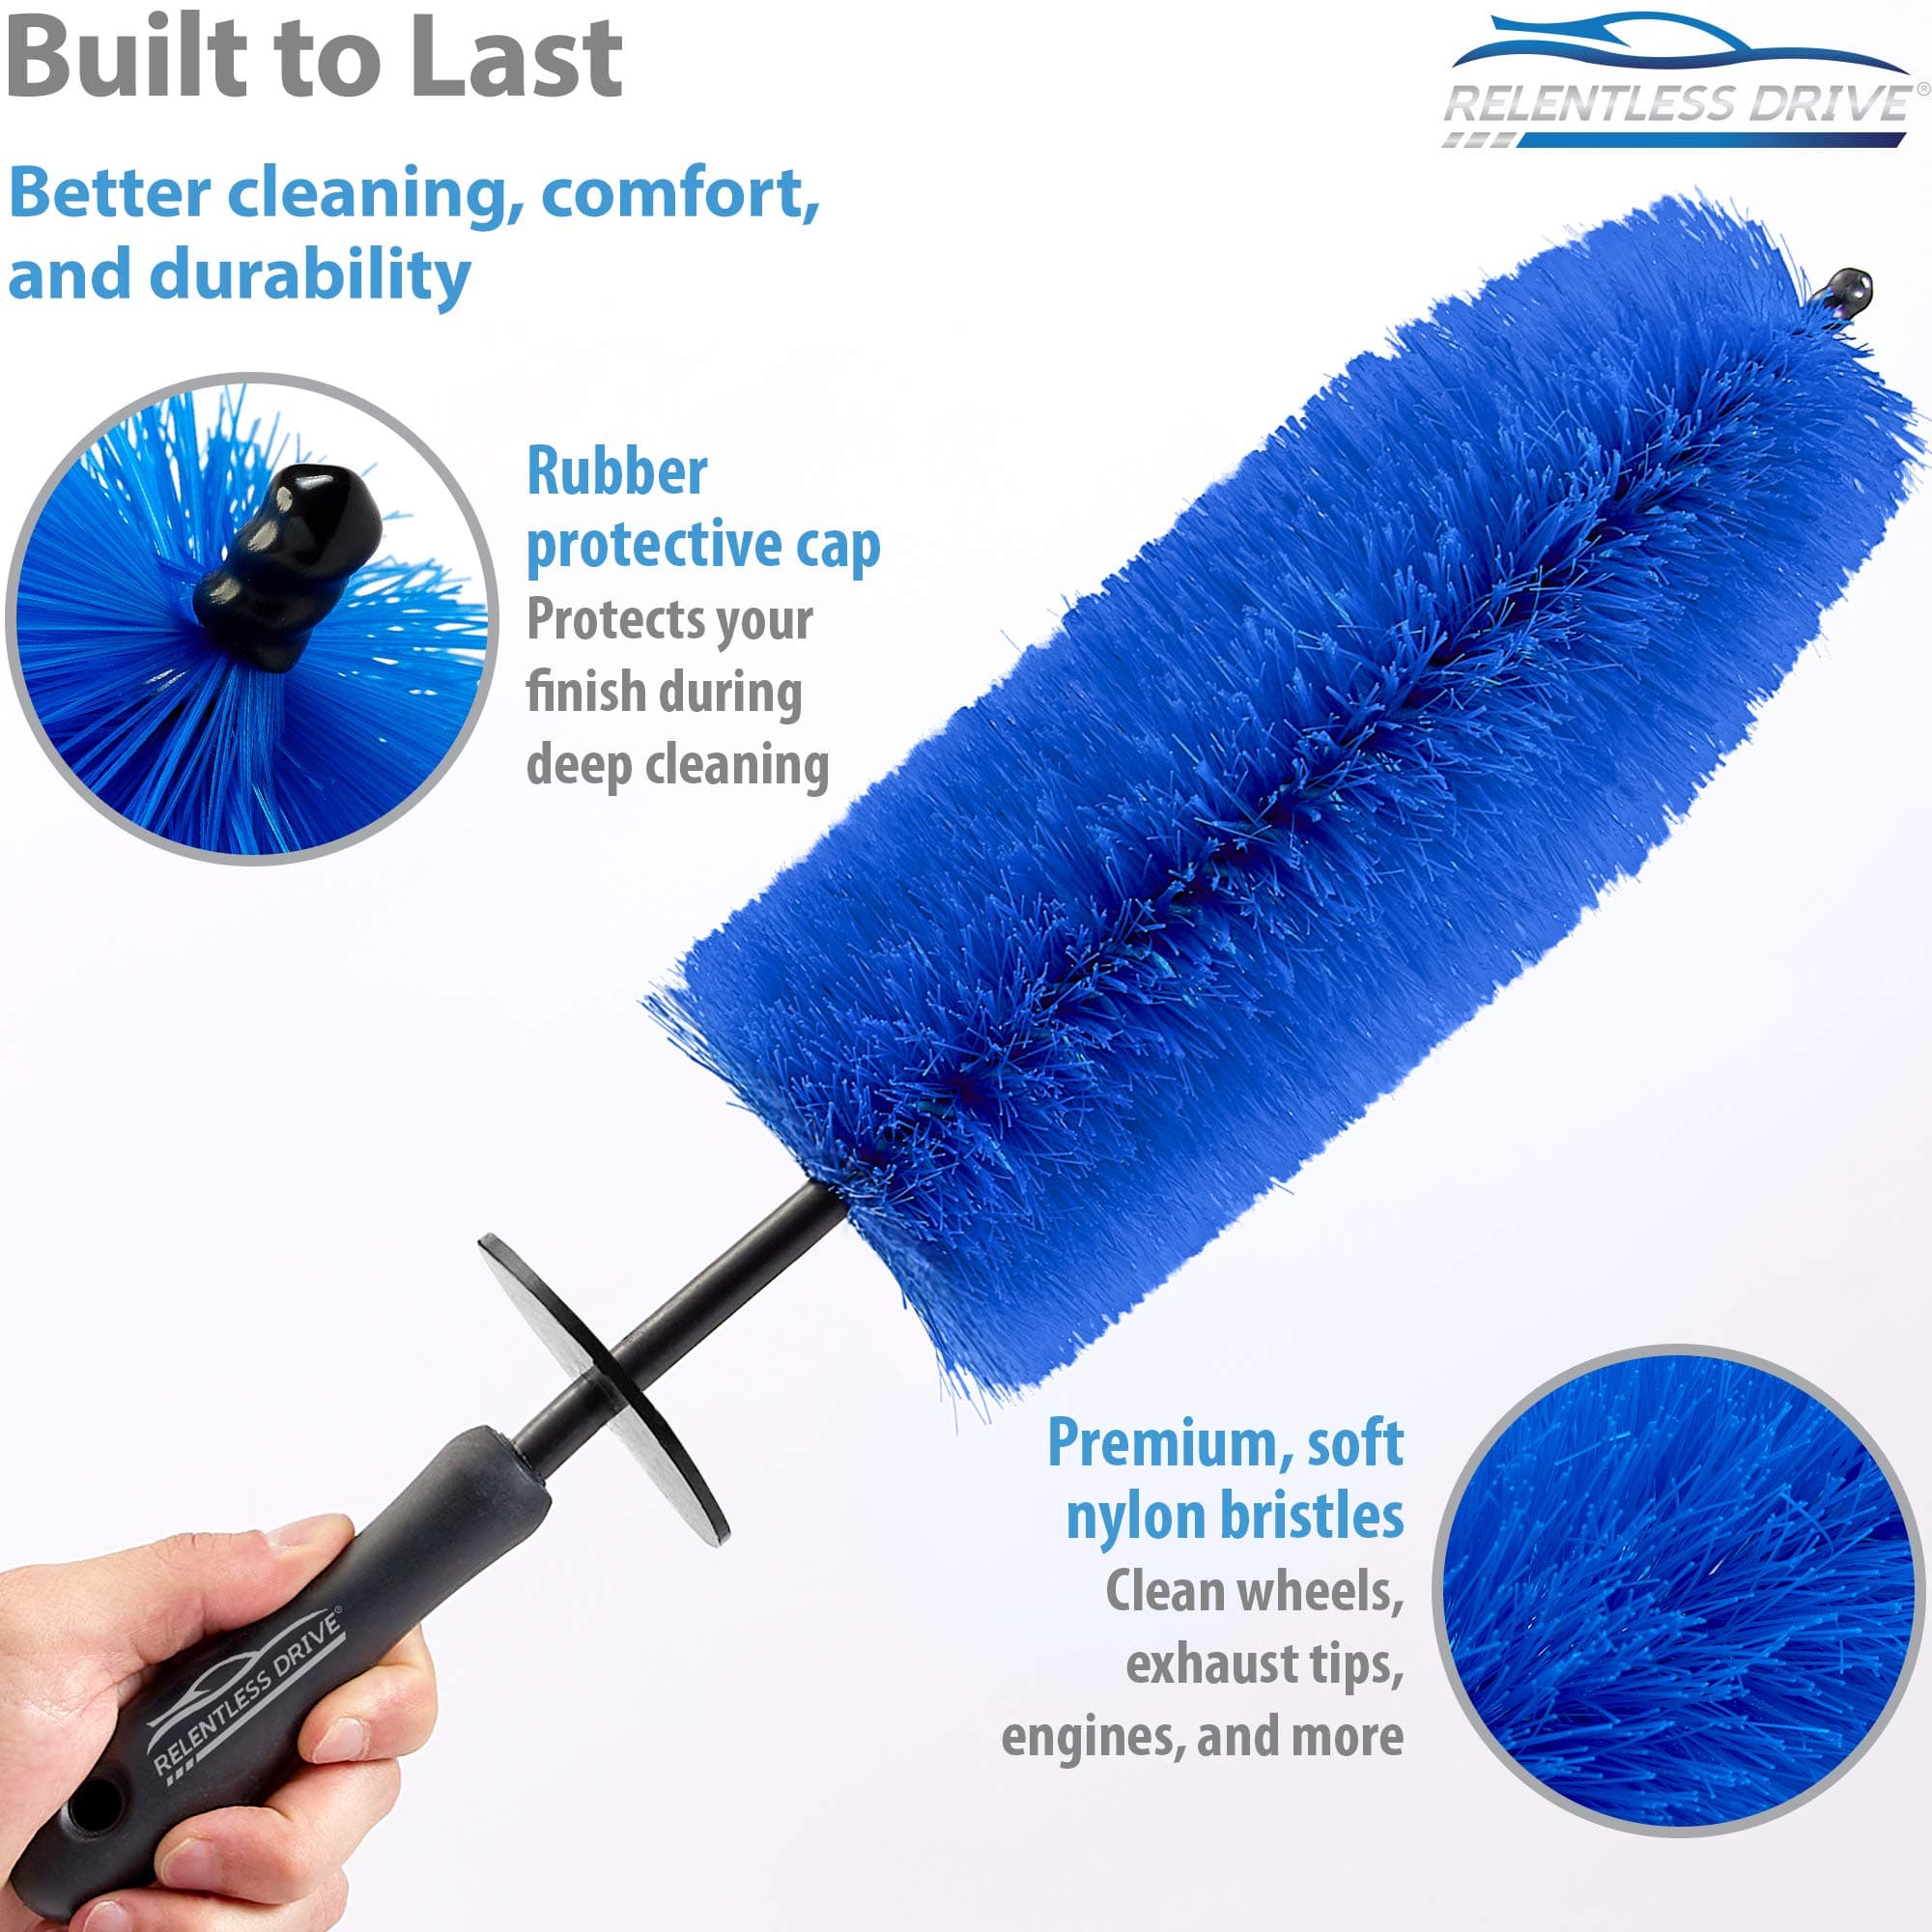 oesee Professional 4 Pack Long Handle Wheel Brush Kit for Cleaning Wheel and Tire- 2x Soft Wheel Cleaning Brush, Detailing Brush and Stiff Tire